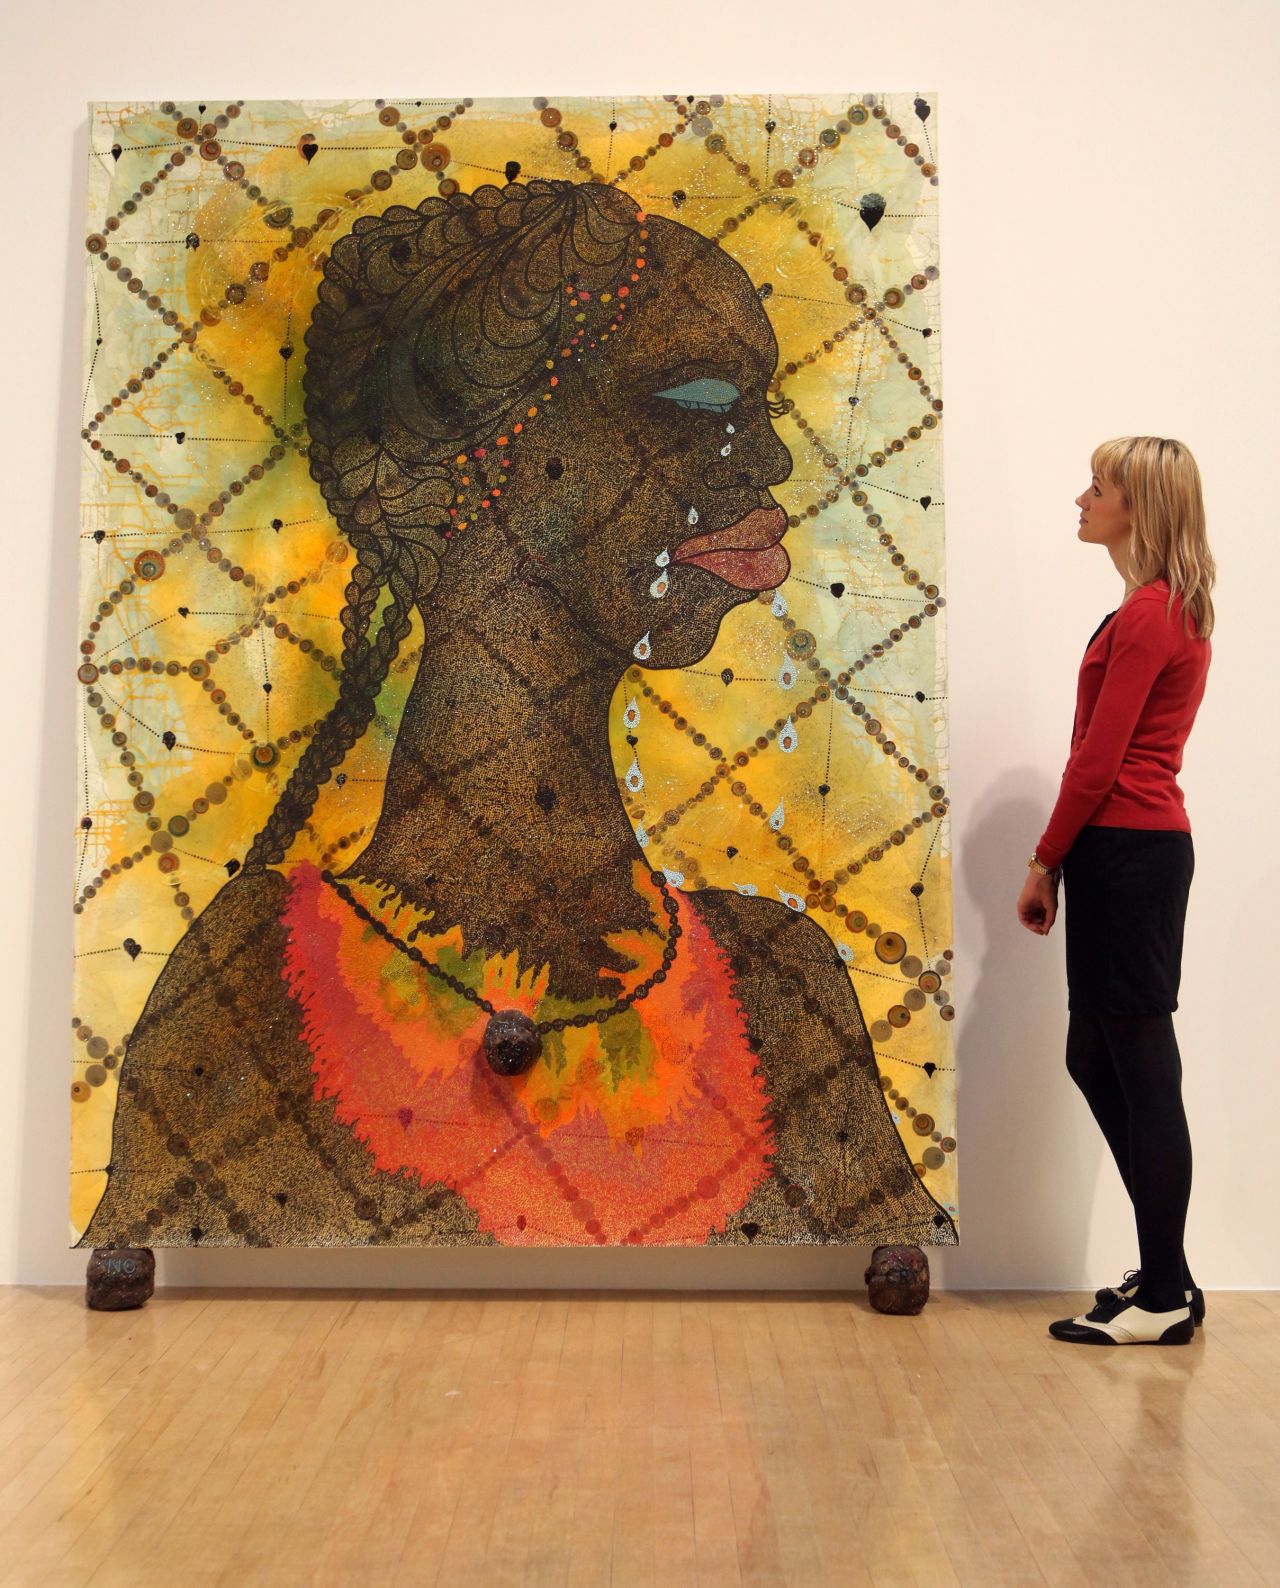 Artist Chris Ofili was born in Manchetser, England to Nigerian parents. His work has drawn inspiration from a research trip to Zimbabwe. He is a former winner of Britain's prestigious Turner Prize for art, and his works include "No Woman, No Cry," pictured.